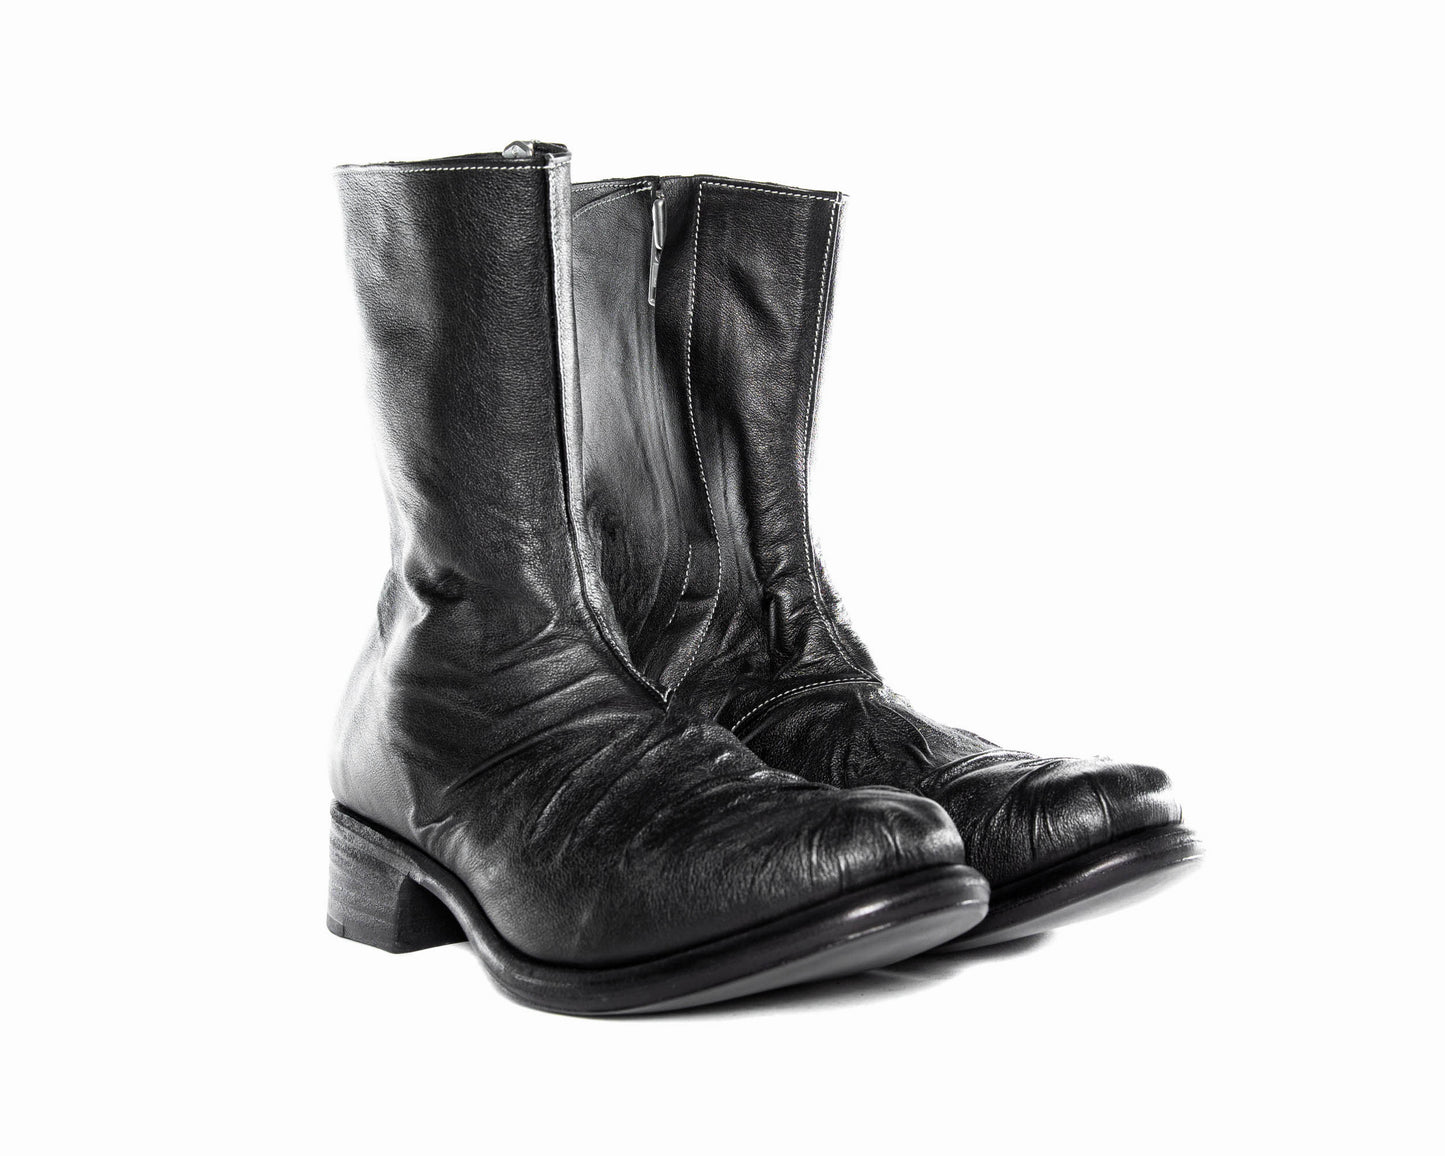 Black Wrinkle Creases Calf Leather Side Zipper CONSERVATIVE Boots by SODERBERG